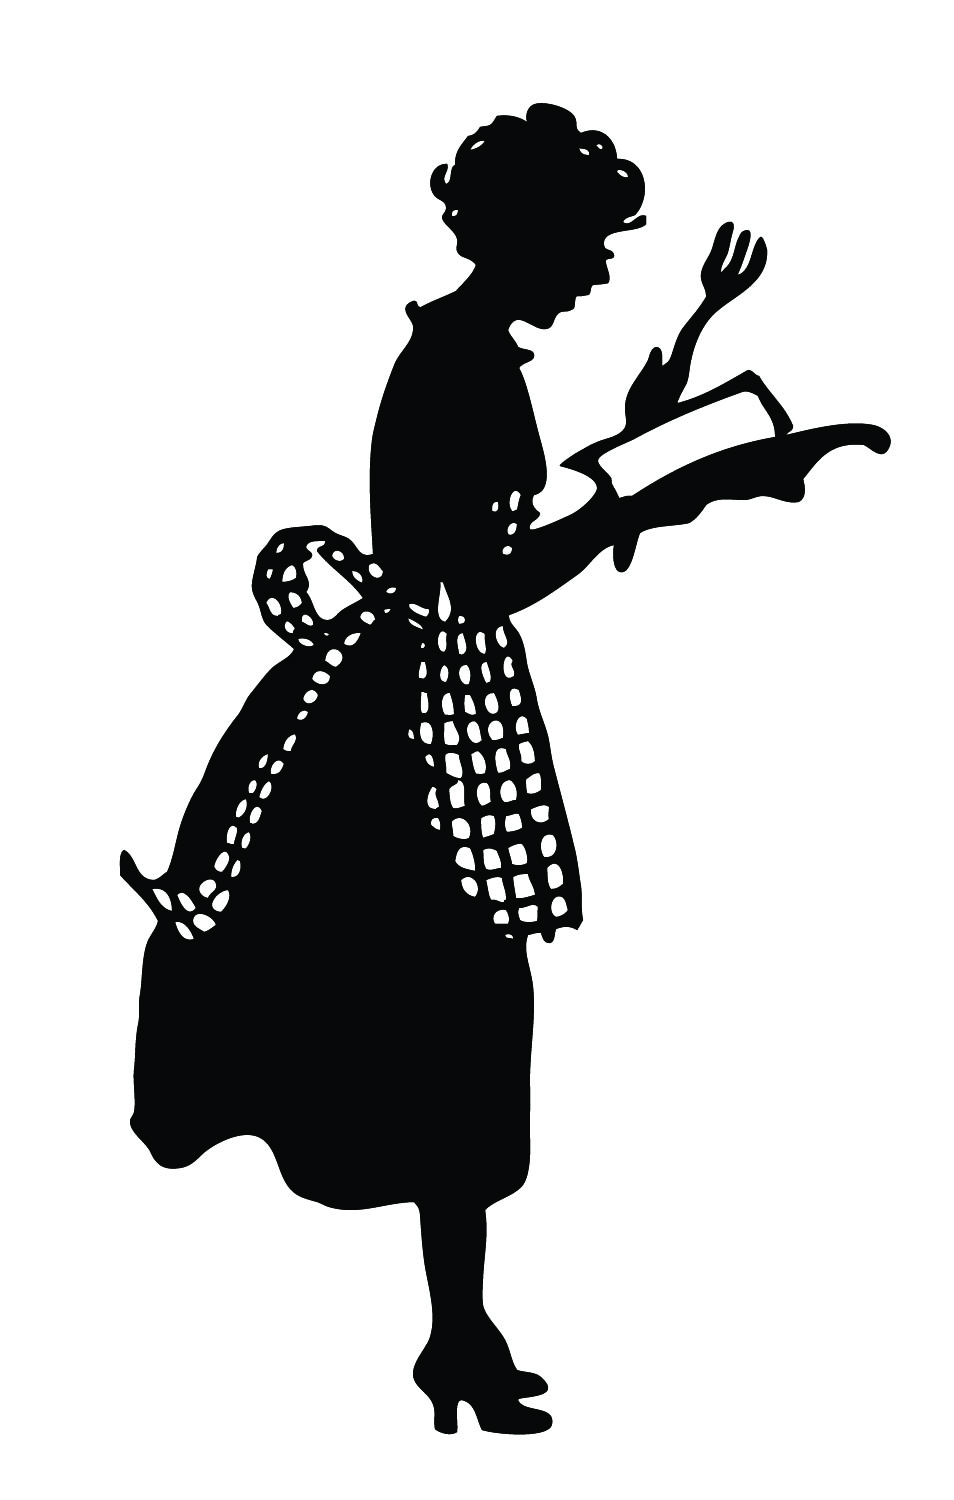 Woman Cooking Silhouette   Clipart Panda   Free Clipart Images